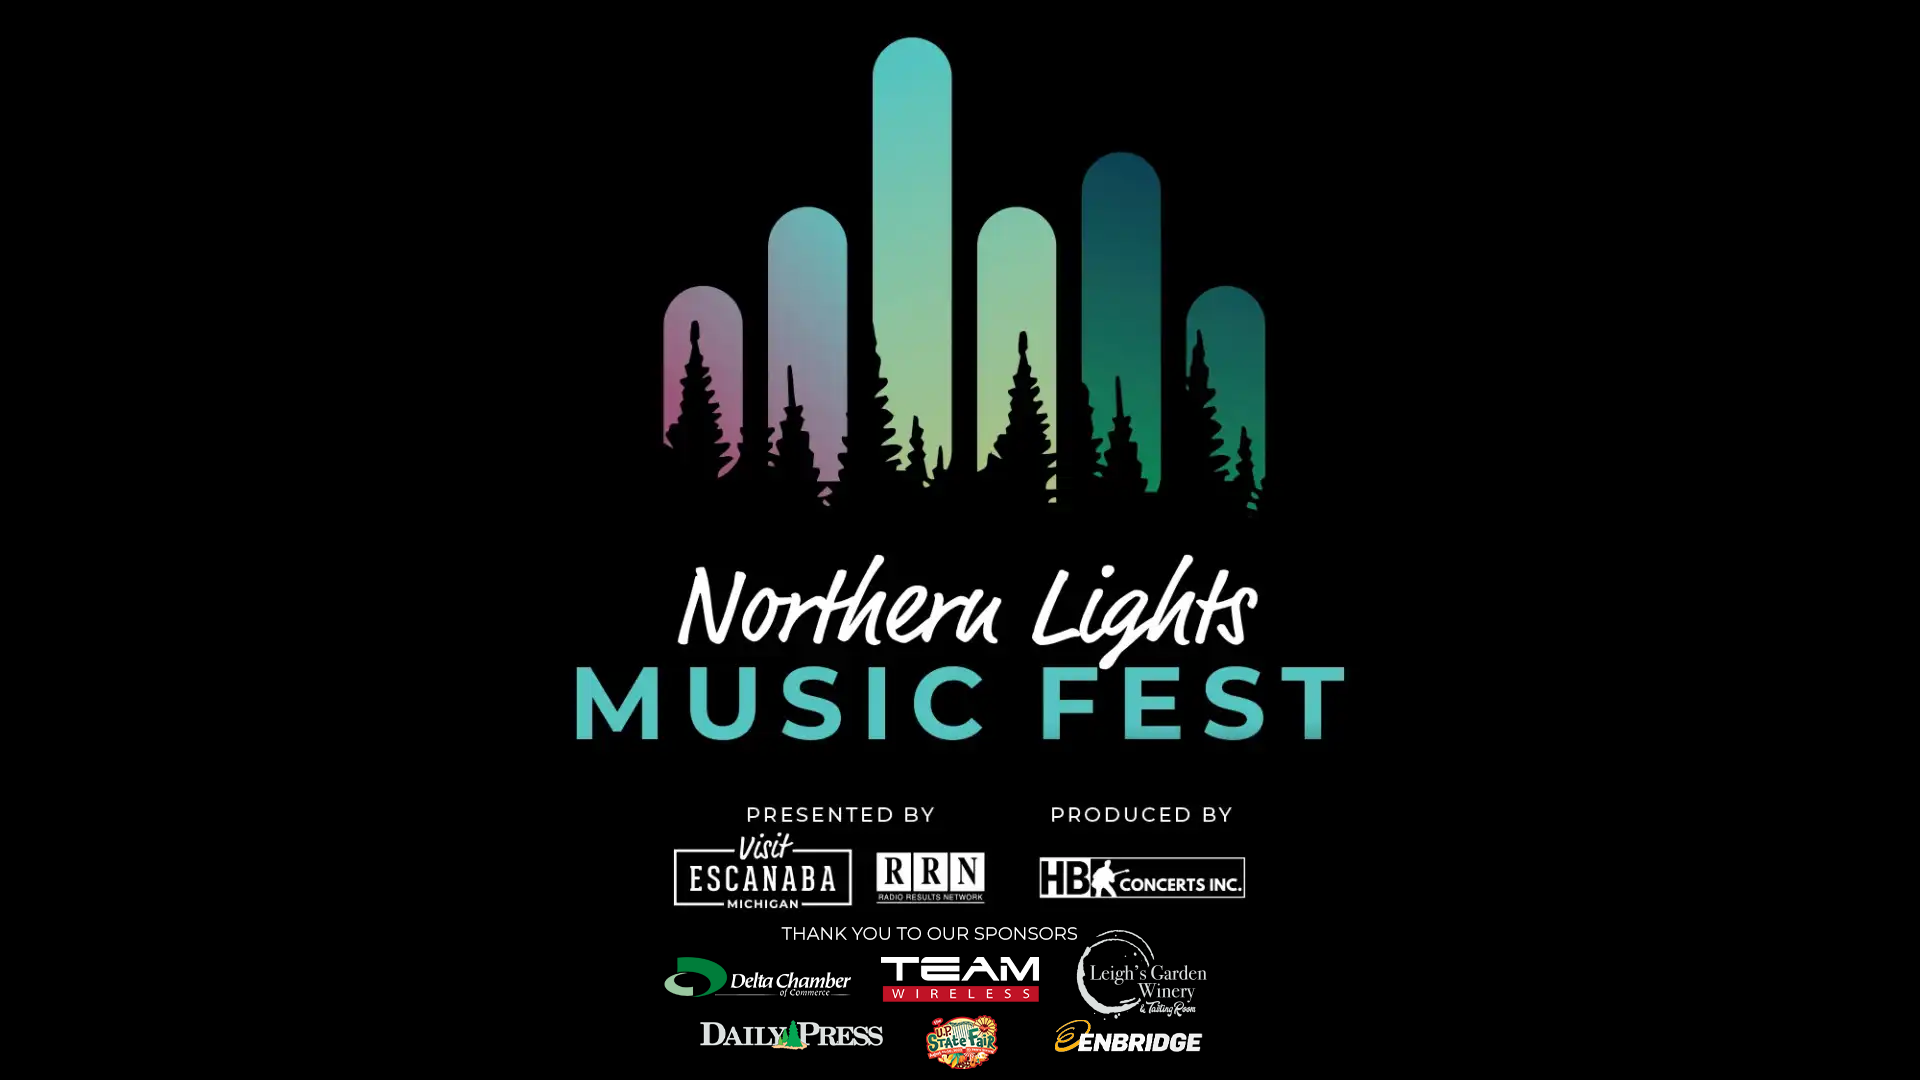 Northern Lights Music Fest-Sponsored by Visit Escanaba and Radio Results Network. Produced by HB Concerts Inc.